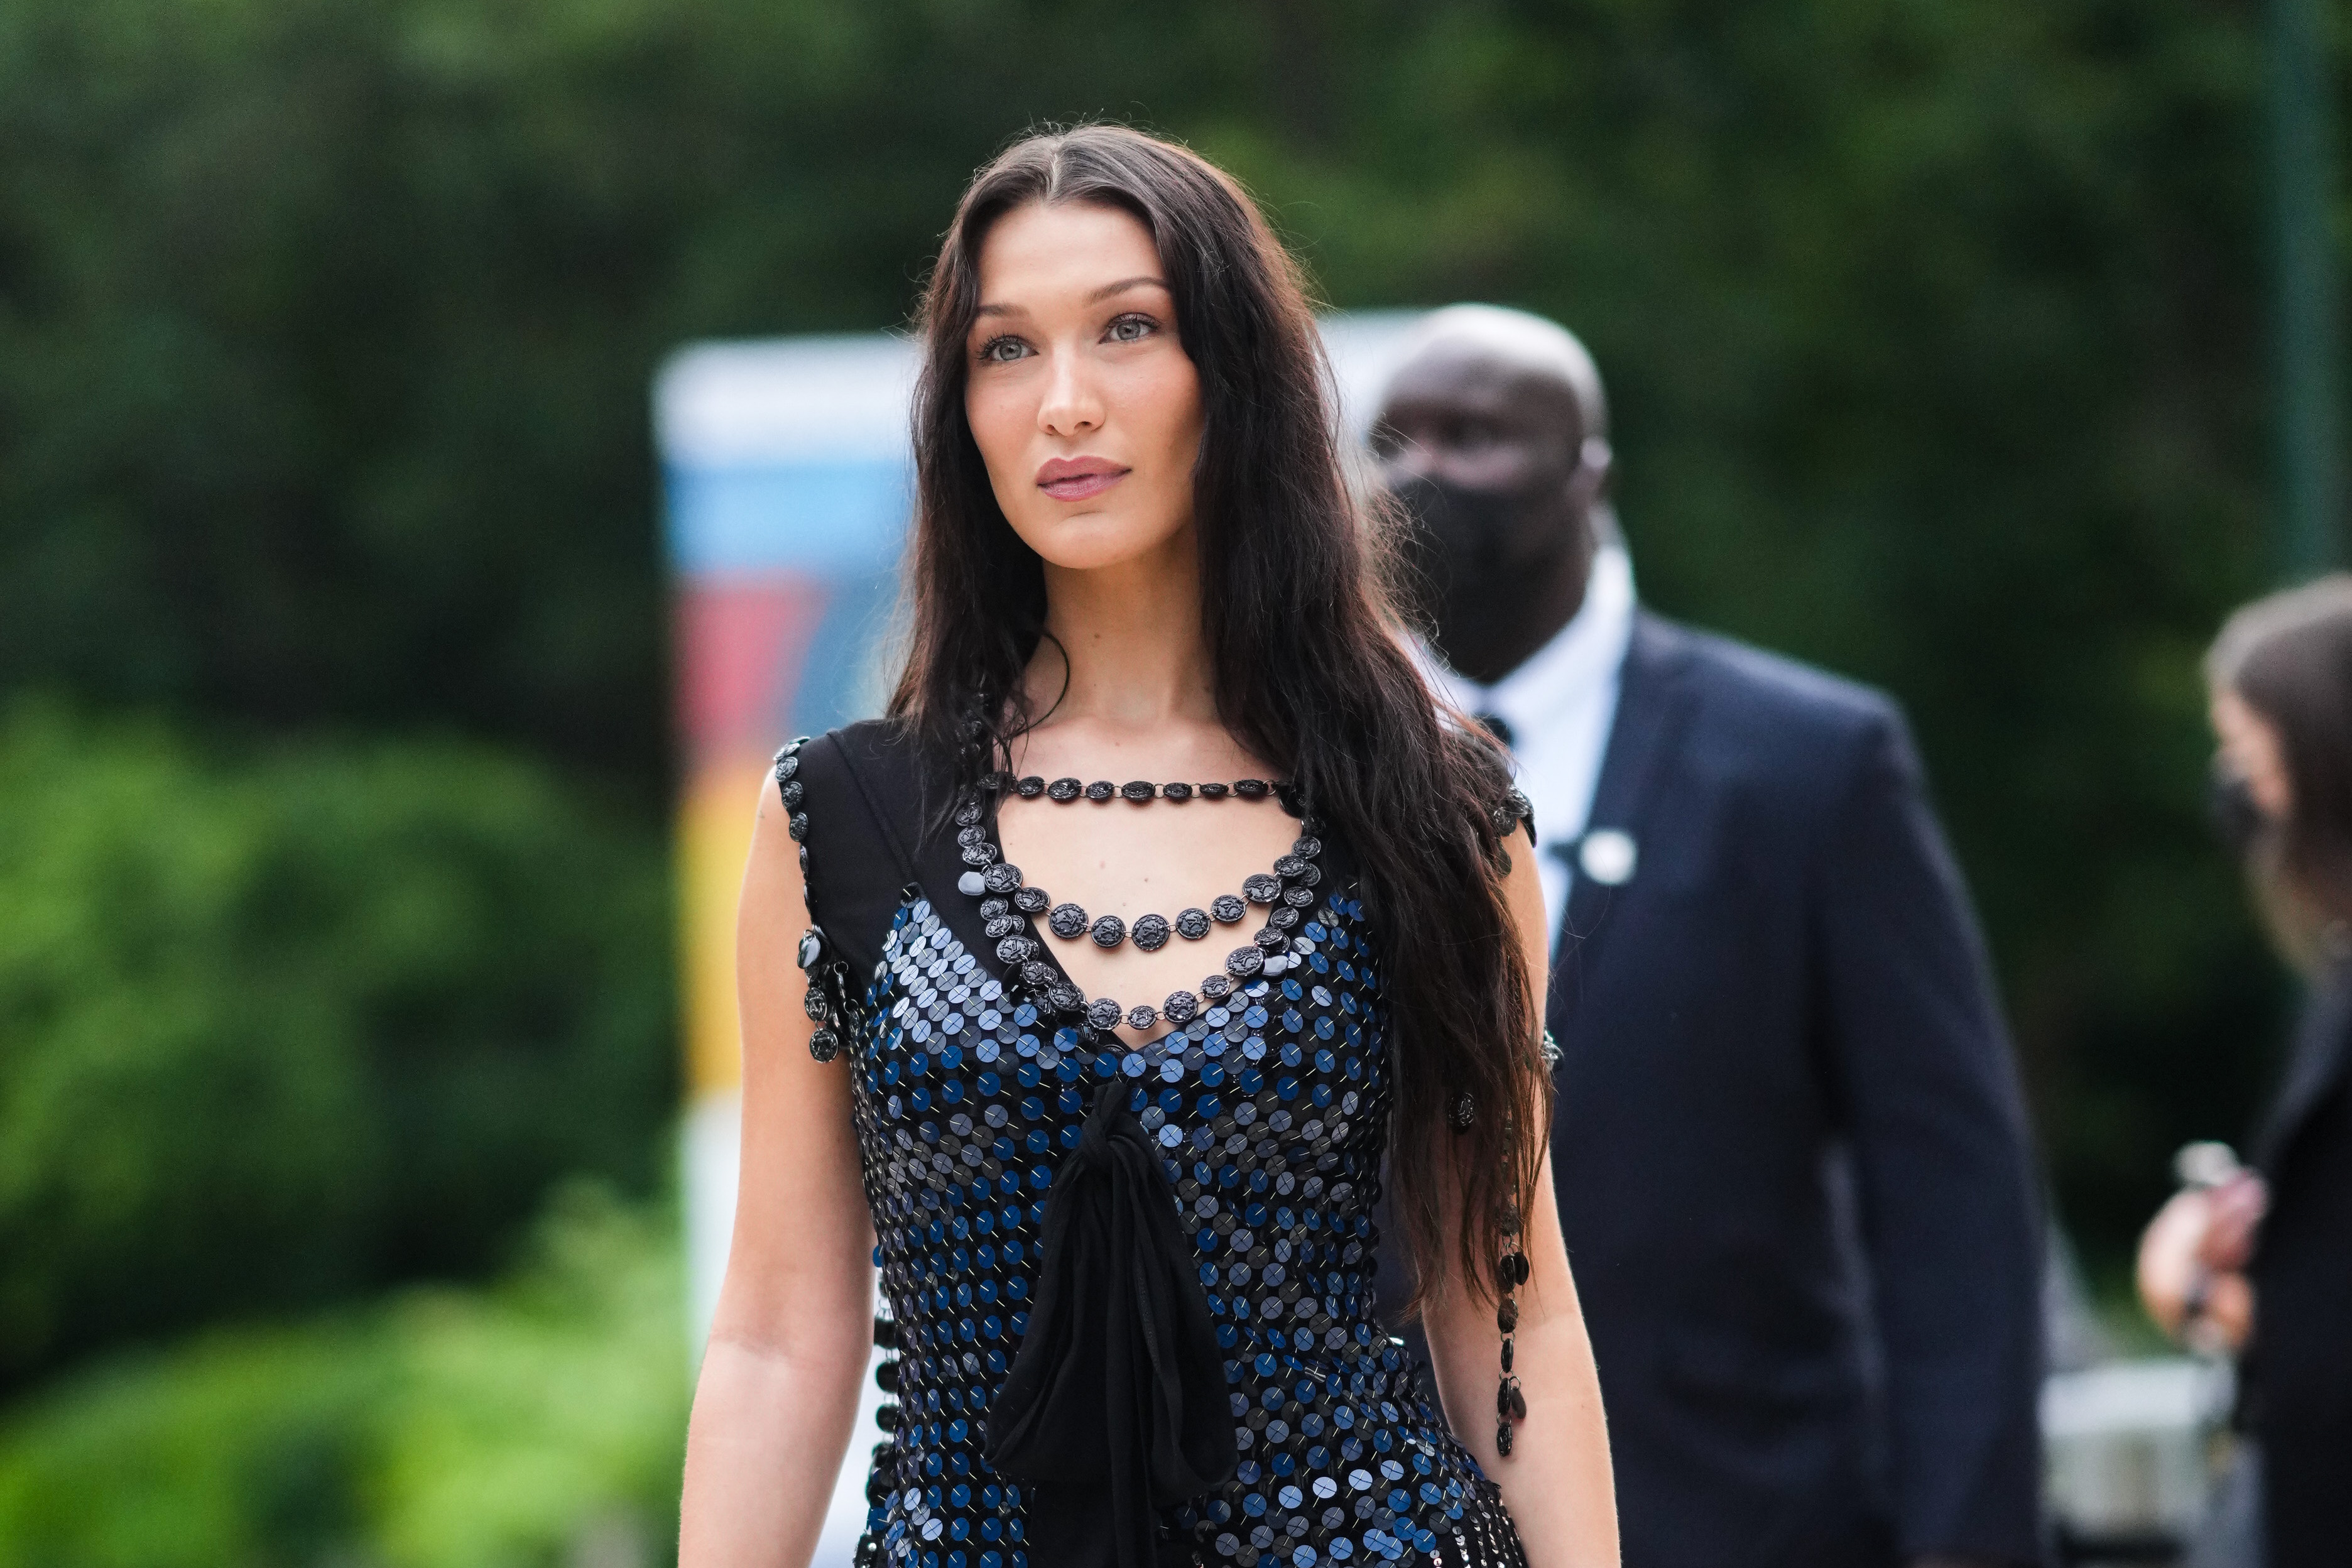 Bella Hadid Lifts The Veil On Mental Health And The Facade of